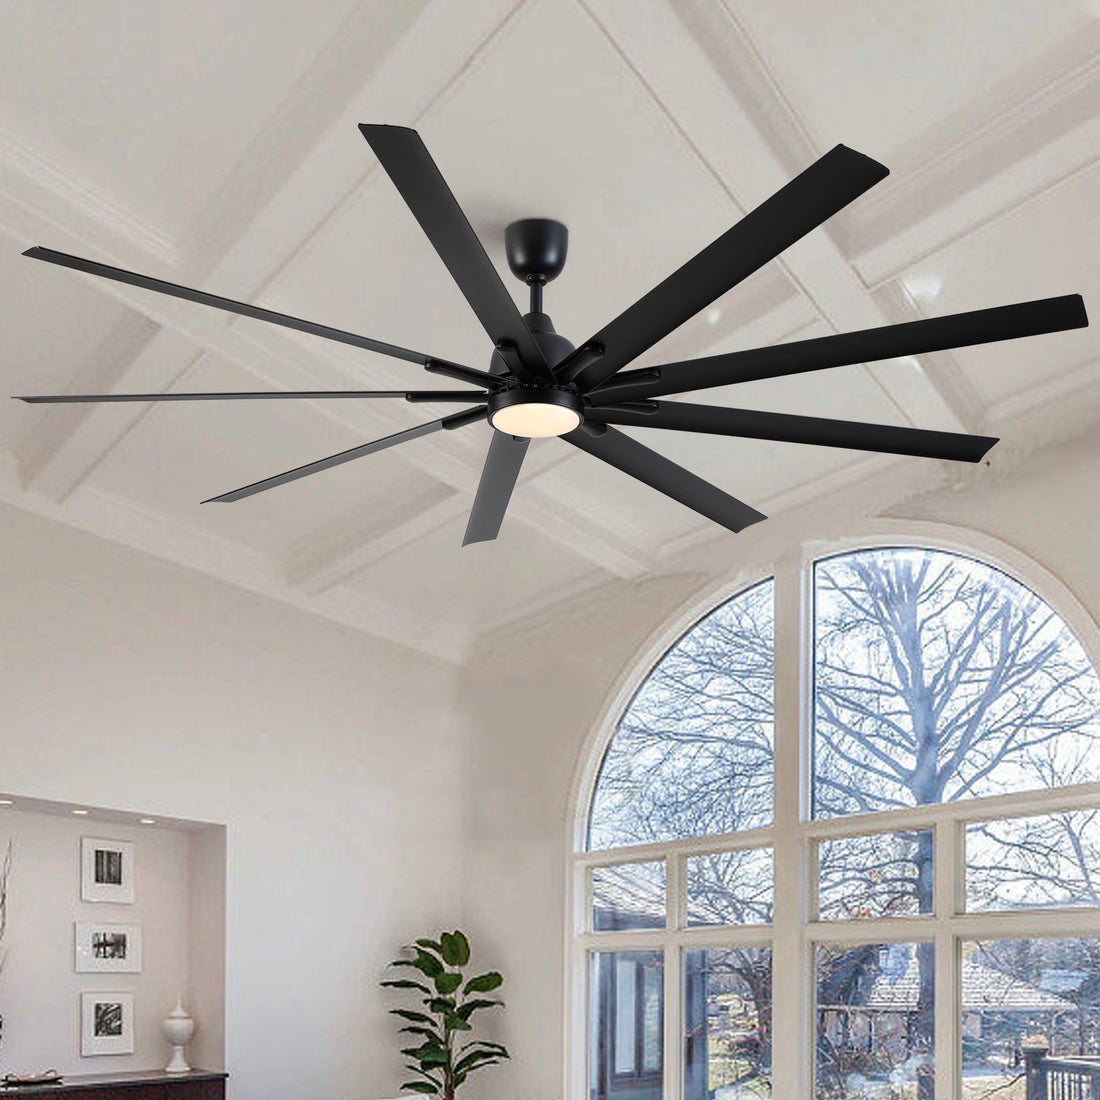 84 In Super Large Black Ceiling Fan with Remote